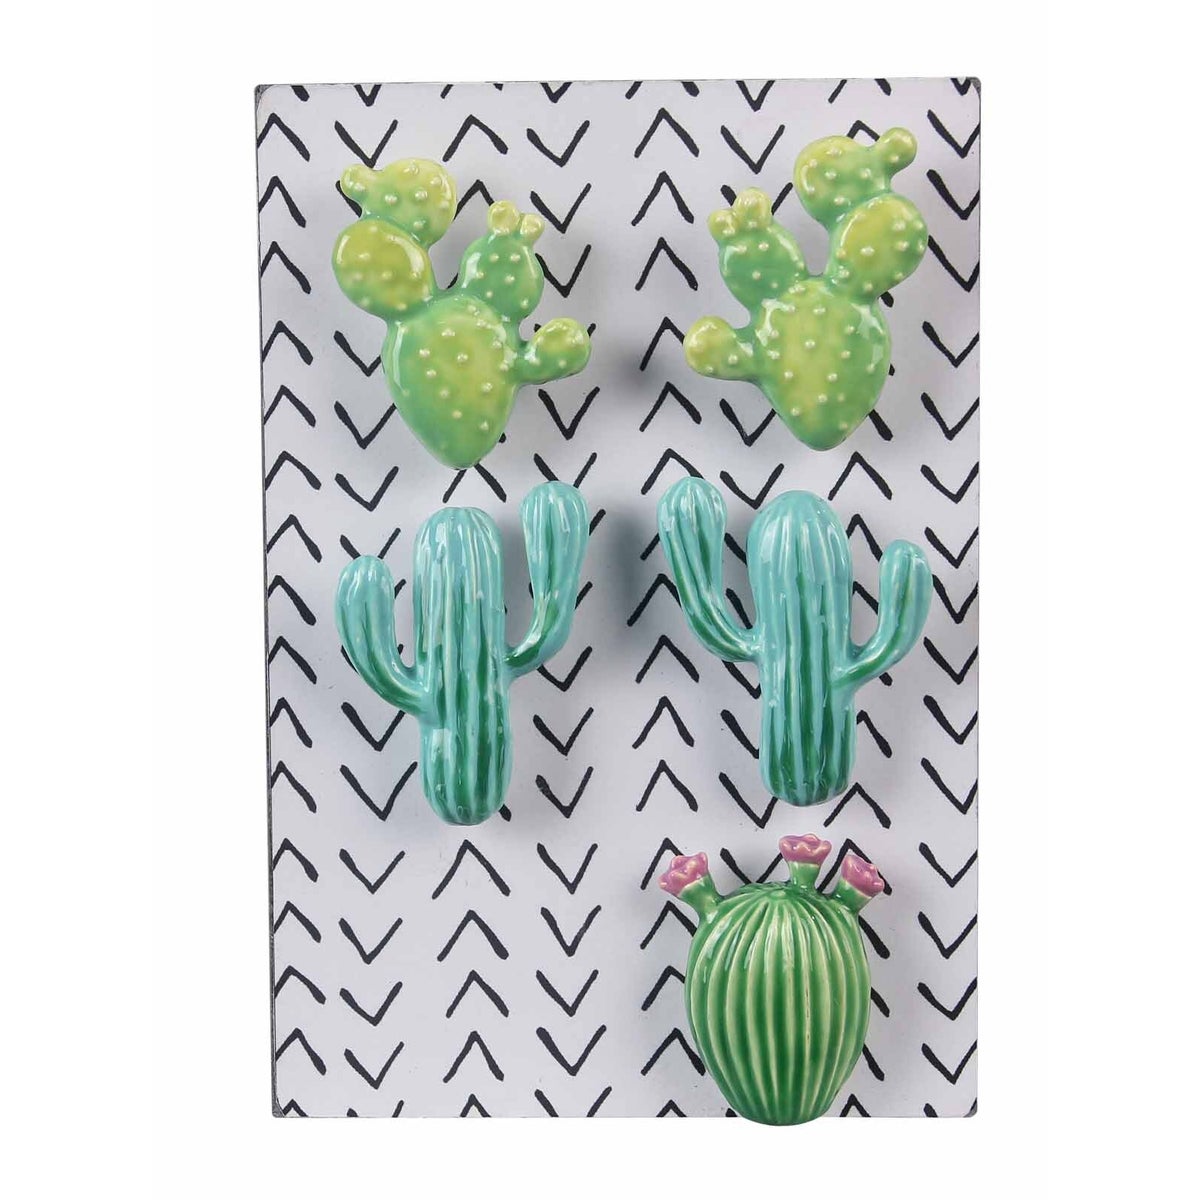 Pewter Cactus Magnets on Board 5 pc/set